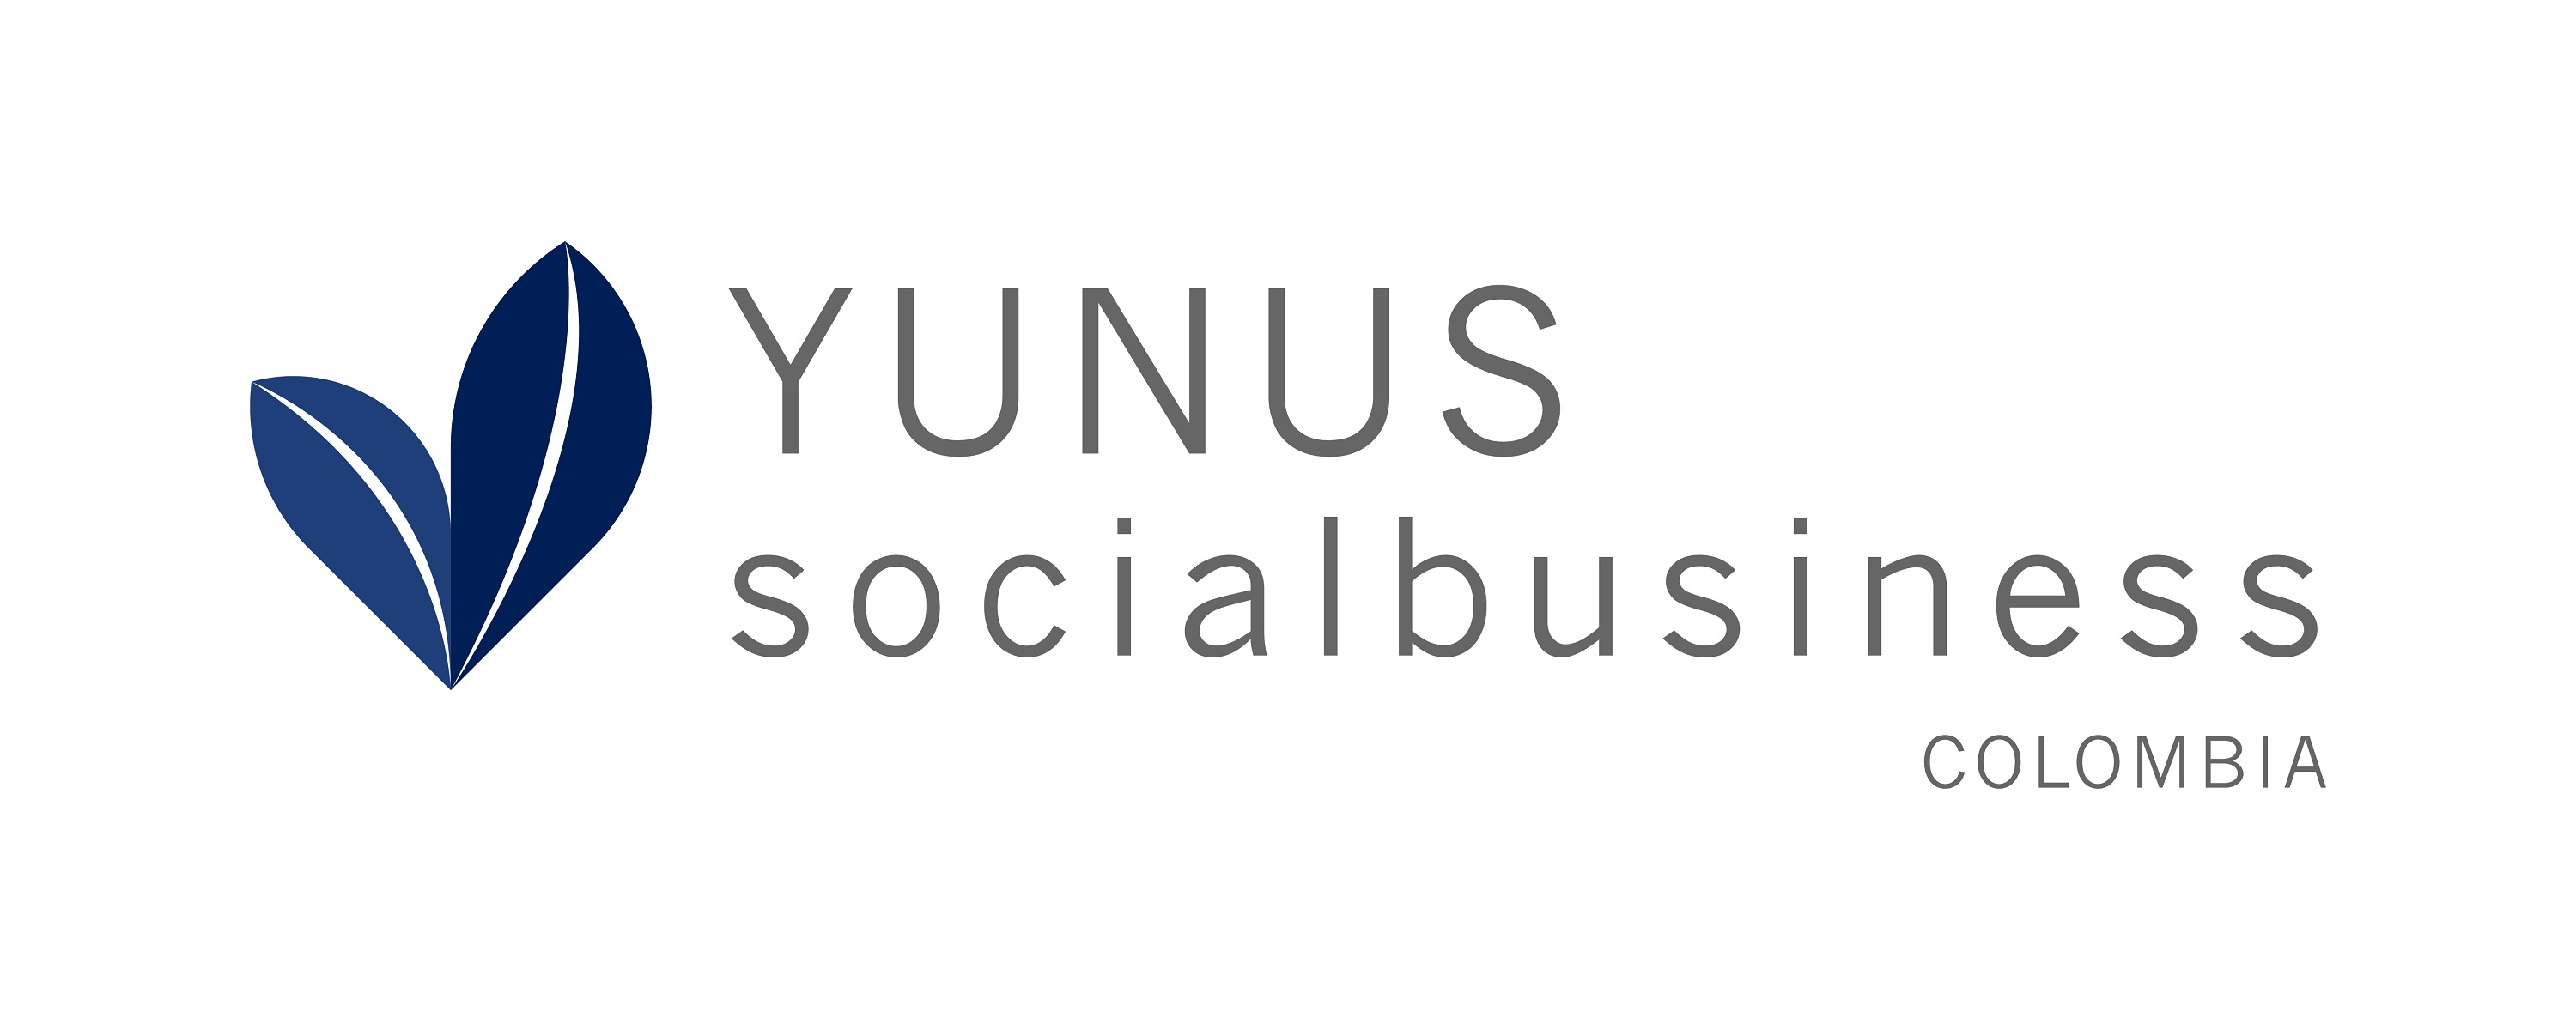 Yunus Social Business Colombia